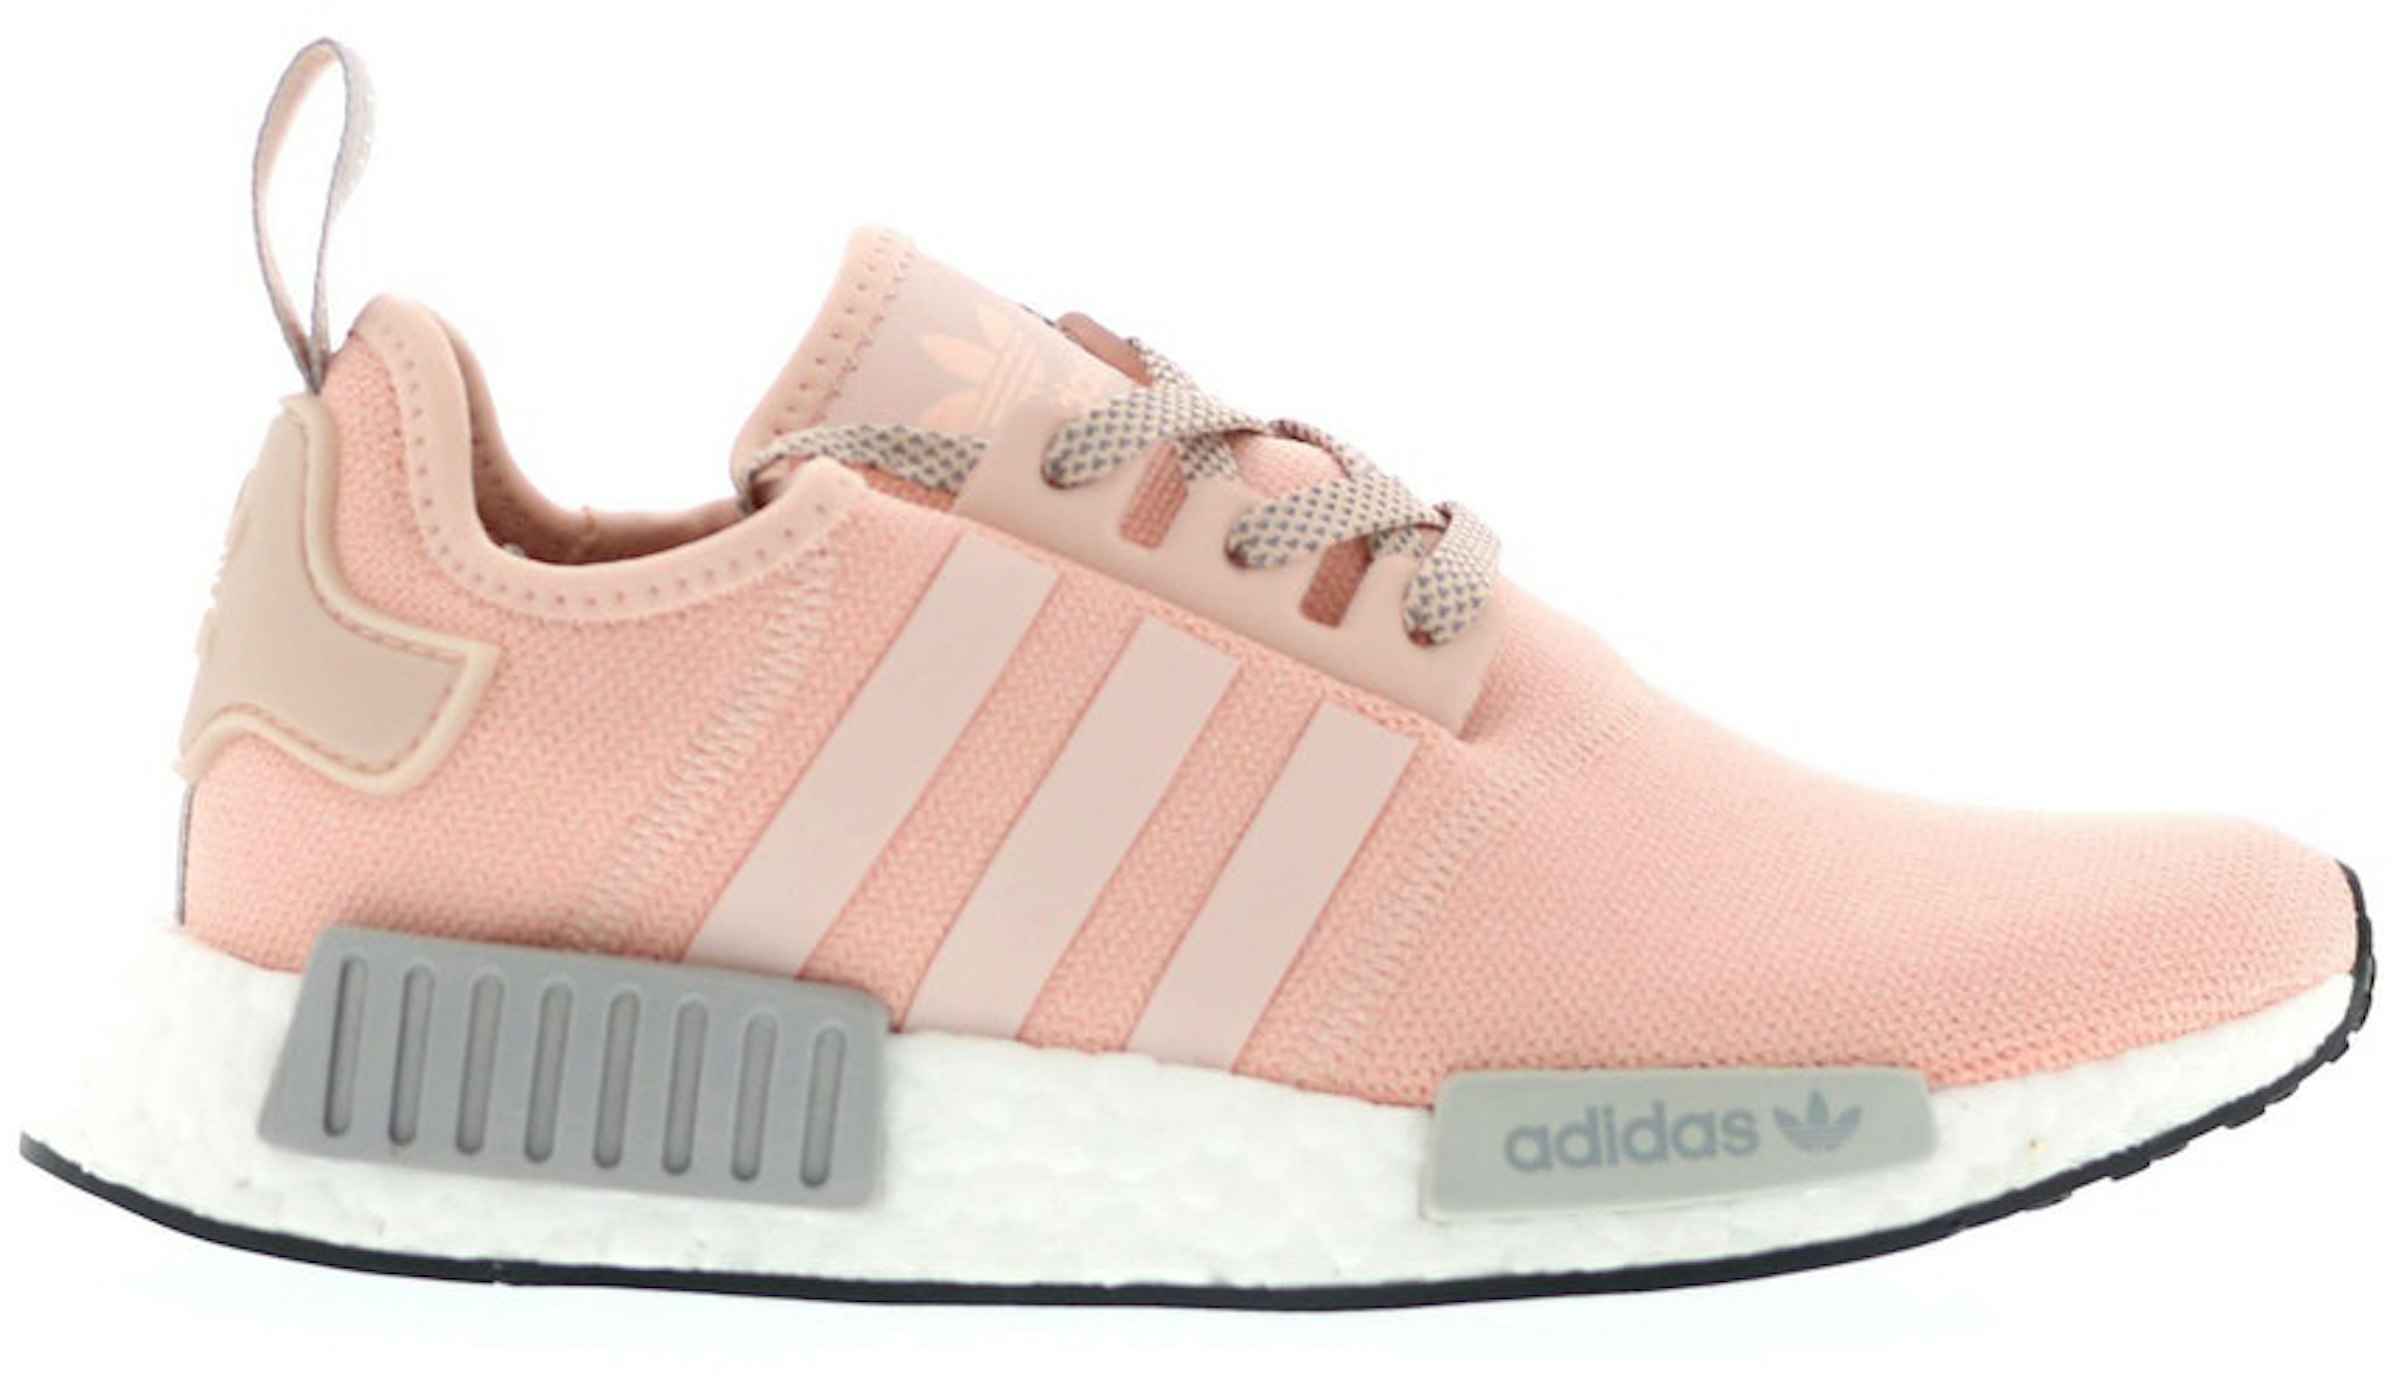 Todos Cumplimiento a Puntualidad adidas NMD R1 Vapour Pink Light Onix (Women's) - BY3059 - US